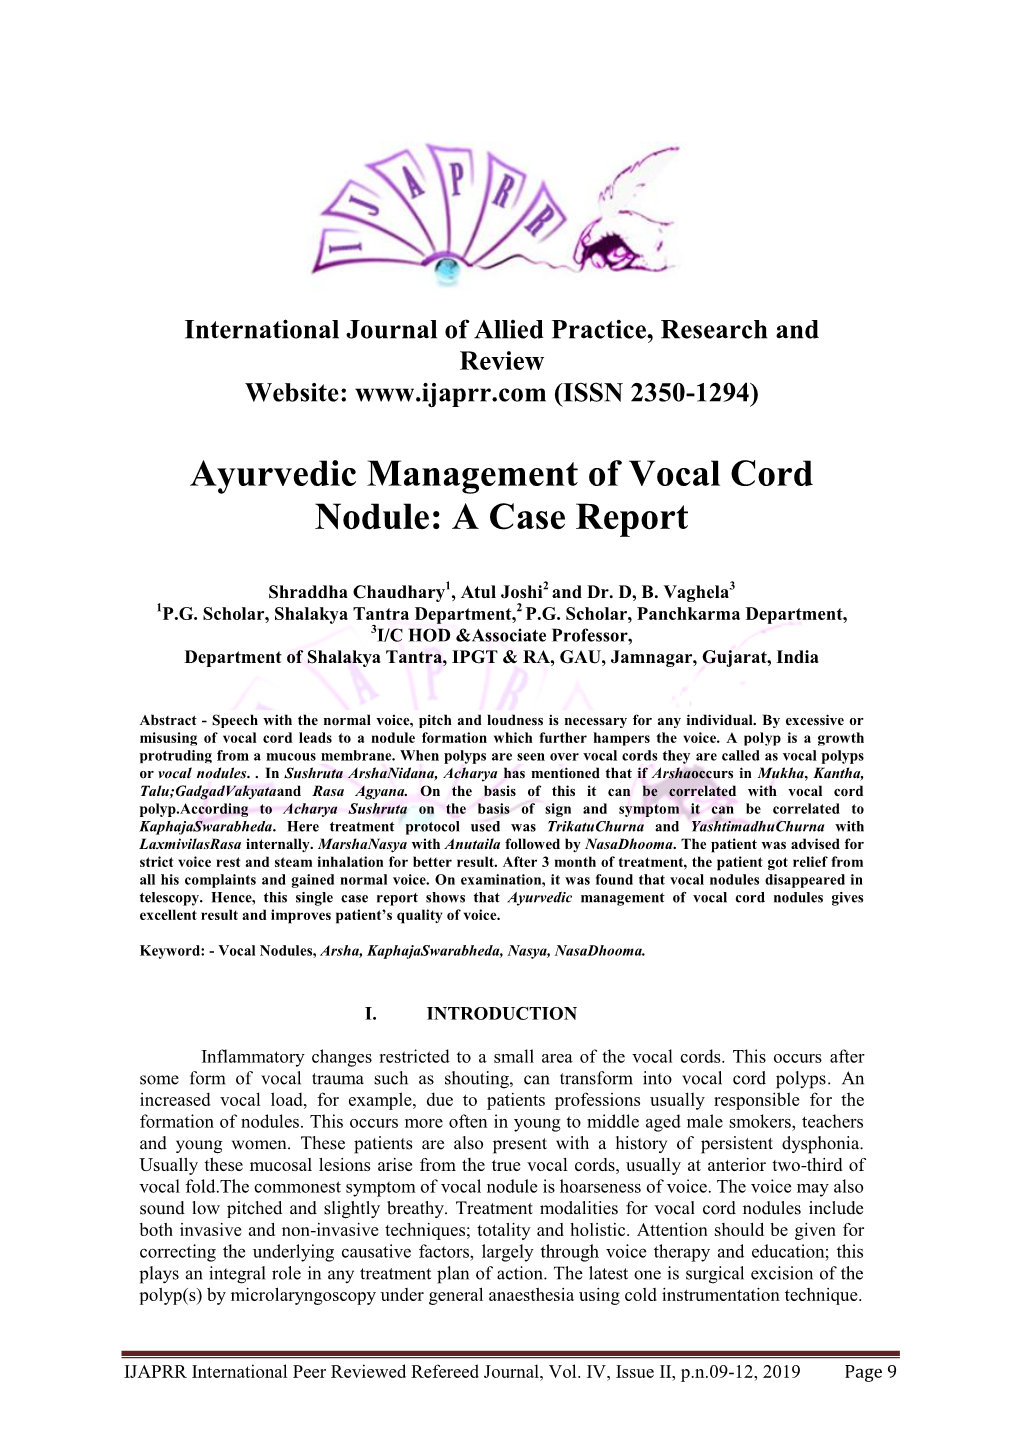 Ayurvedic Management of Vocal Cord Nodule: a Case Report